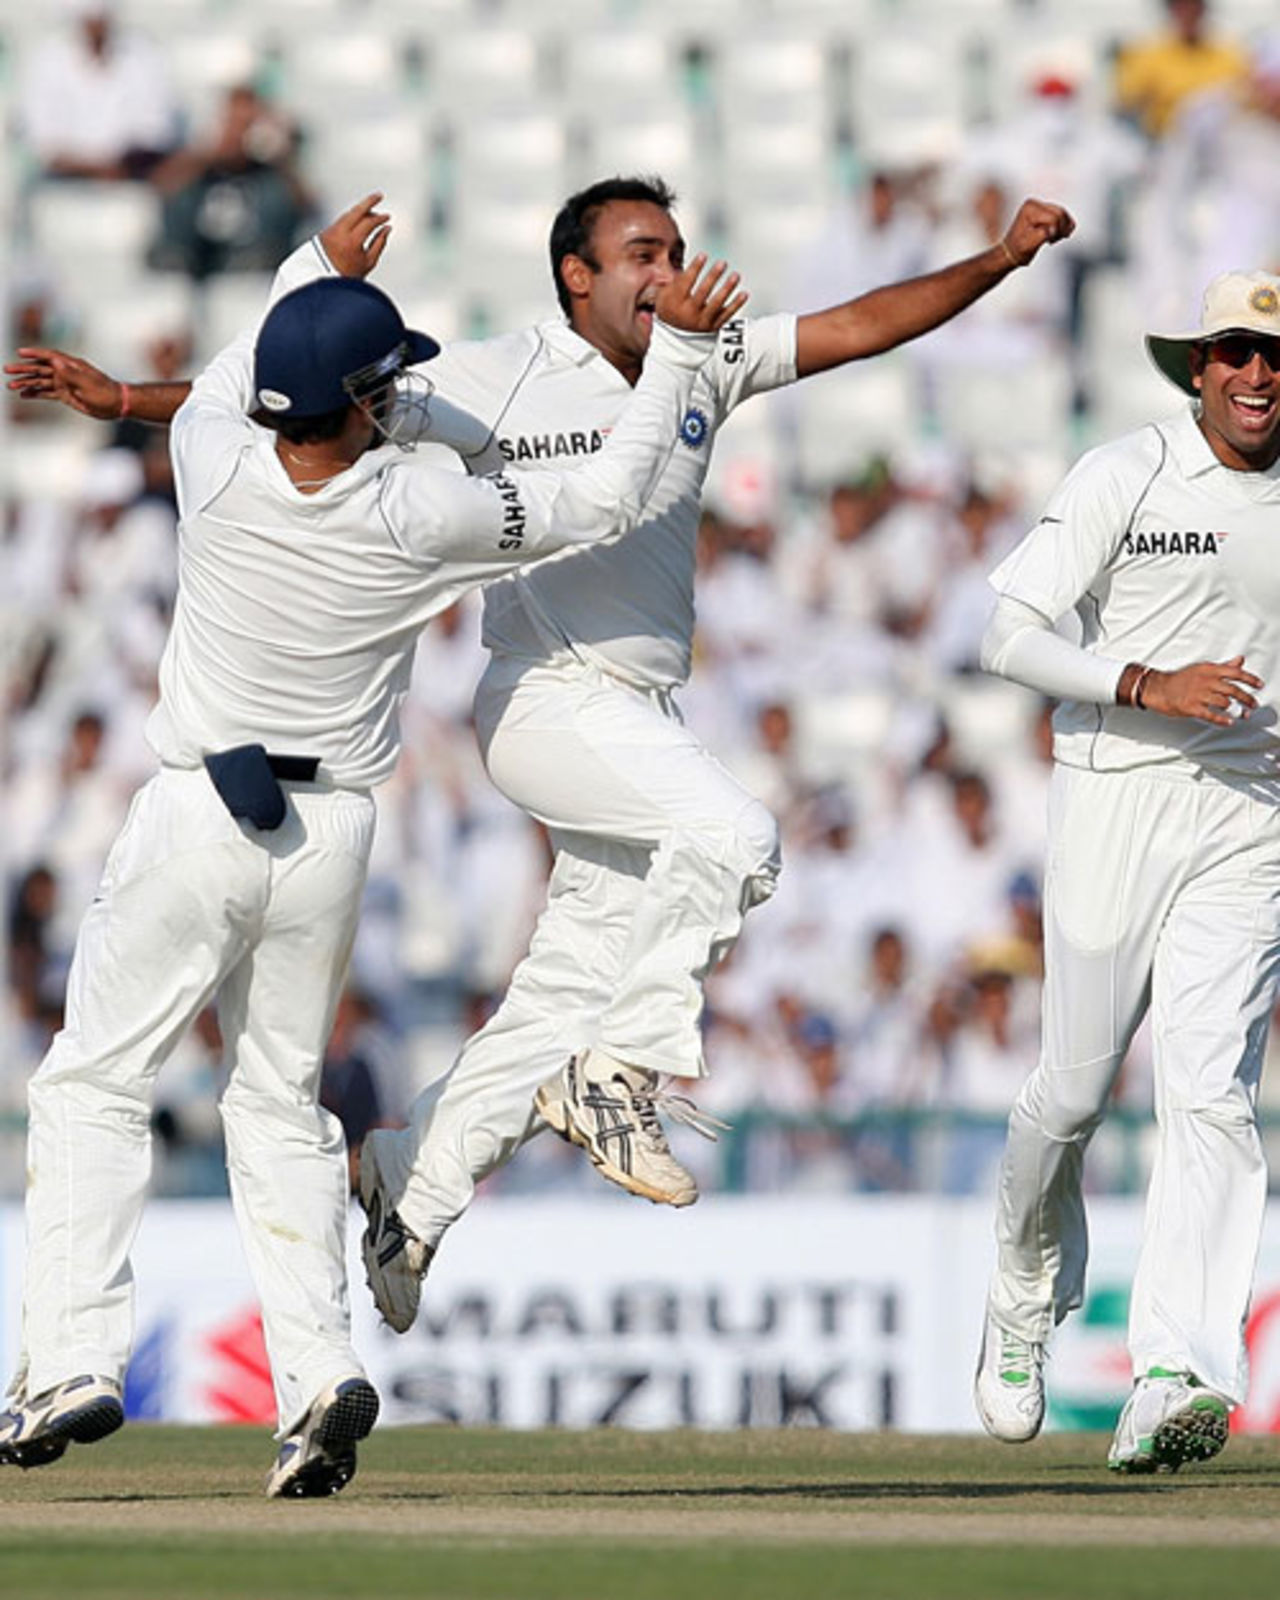 Amit Mishra is over the moon after getting his first Test wicket, that of Simon Katich, India v Australia, 2nd Test, Mohali, 2nd day, October 18, 2008